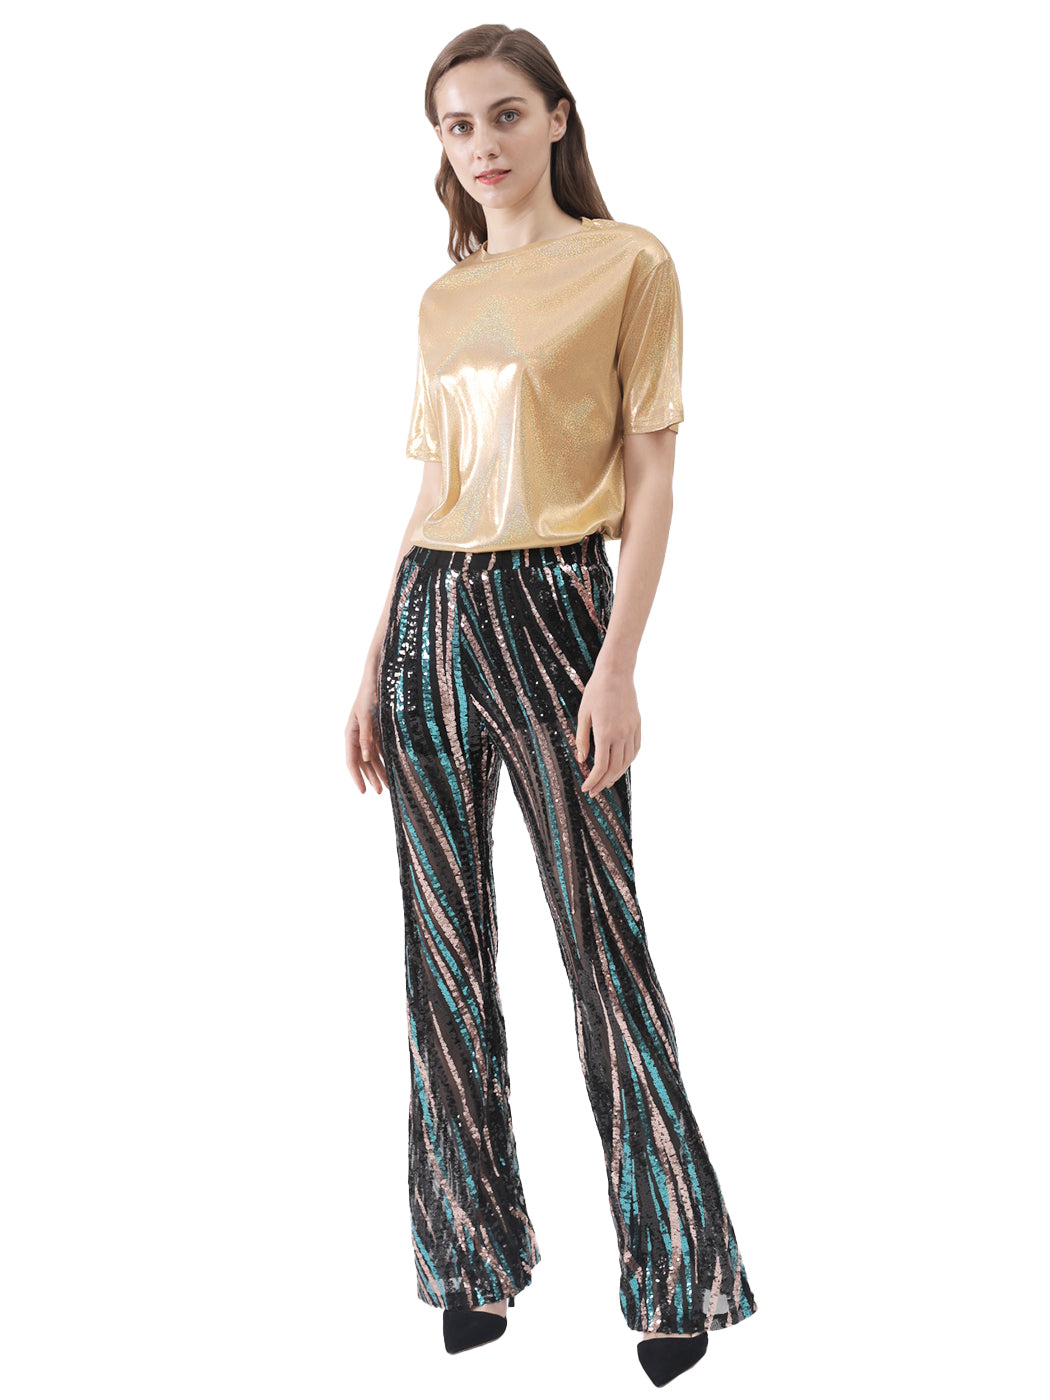 Sequin Pants Wide Leg High Waist Colorful Disco Party Trousers